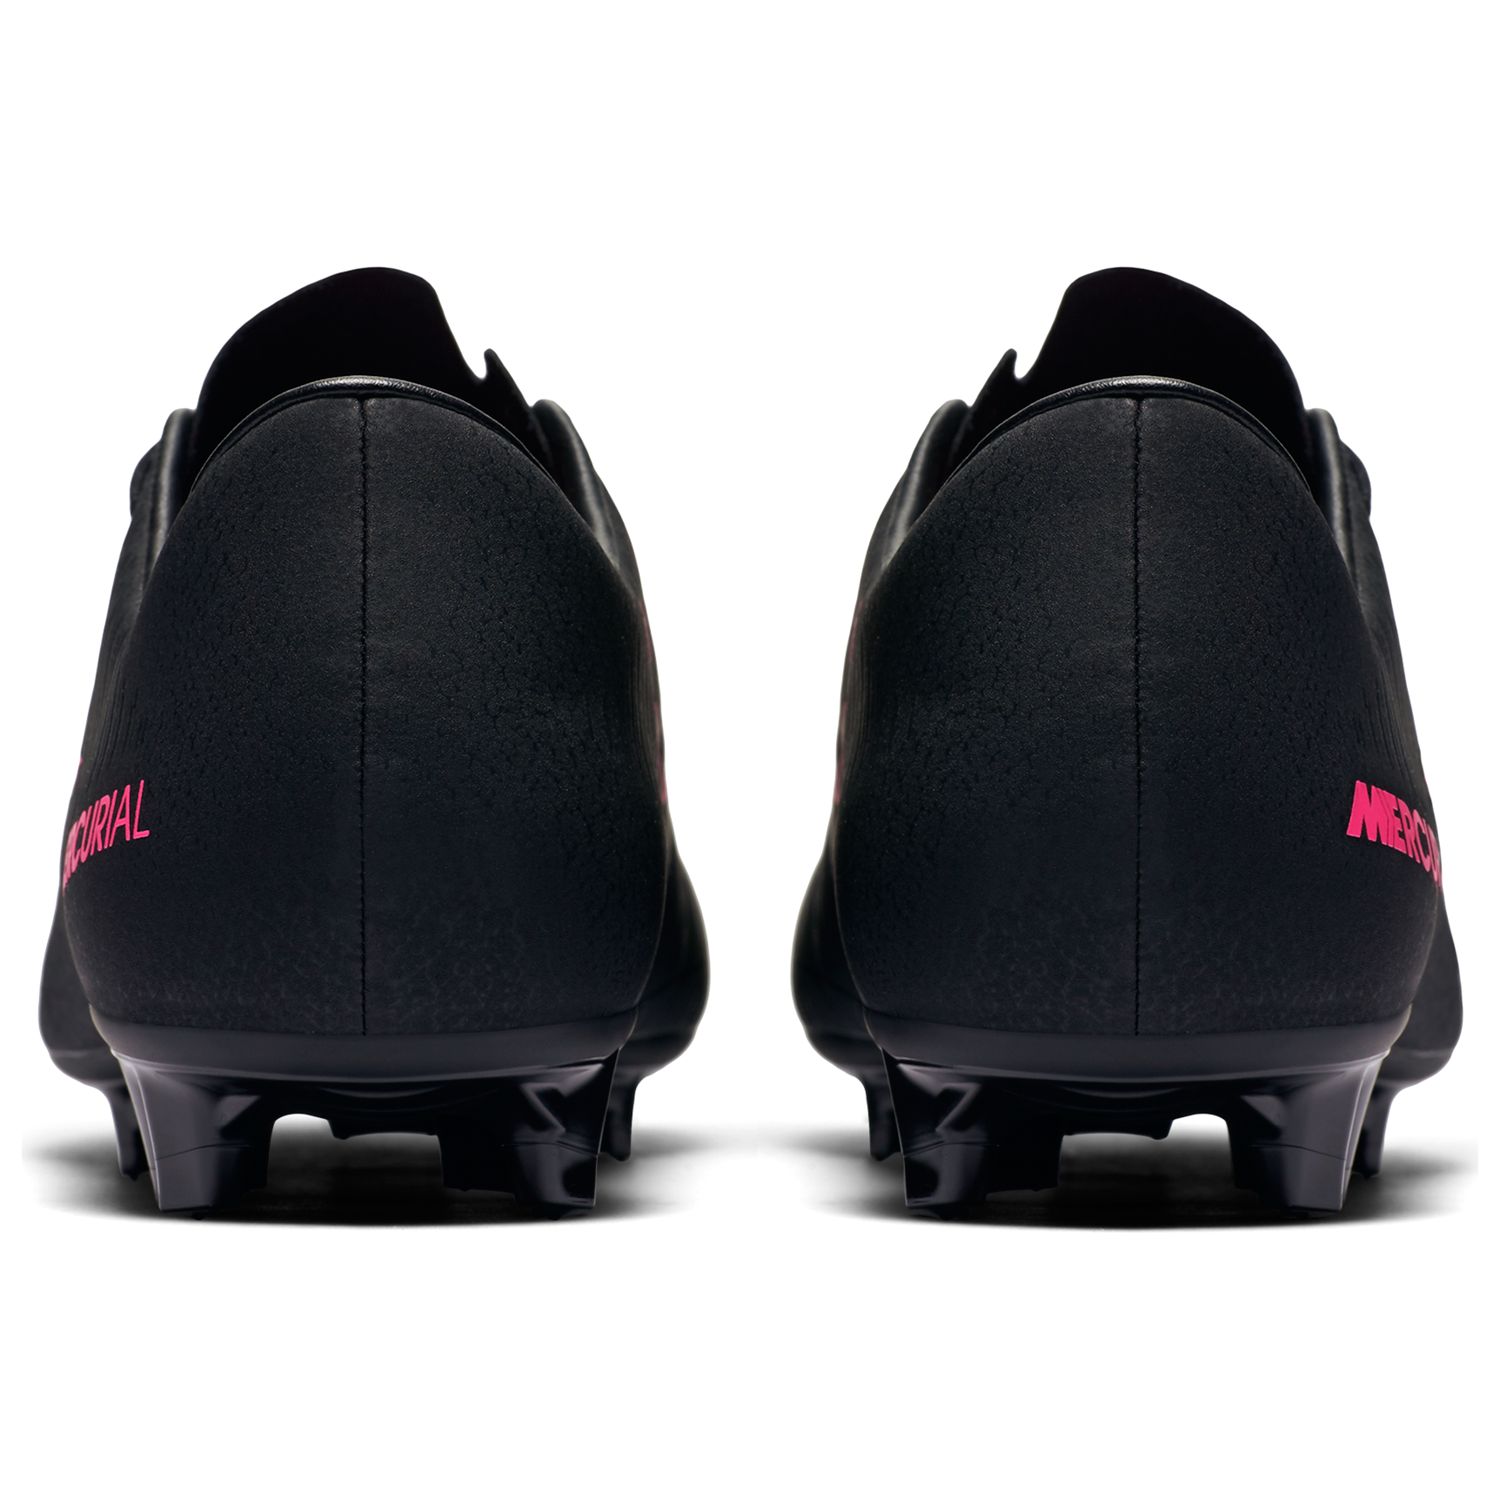 black and pink nike football boots